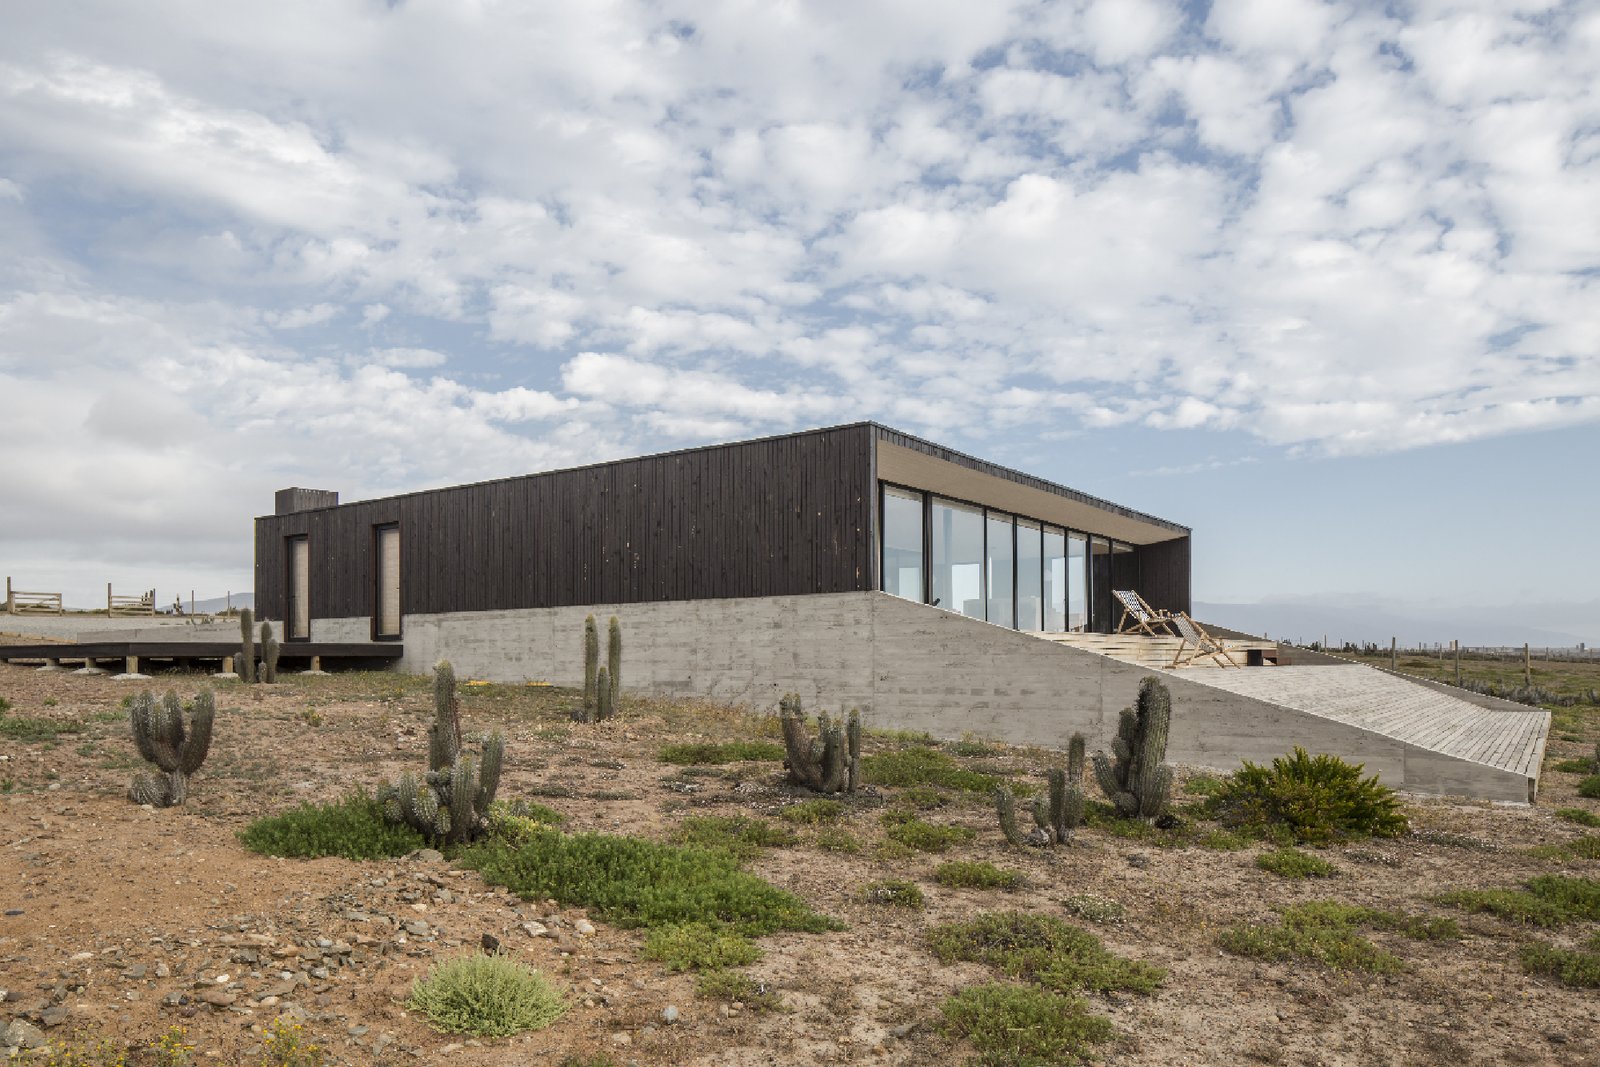 An Unplugged Family Hideout Borders the Ocean in Chile